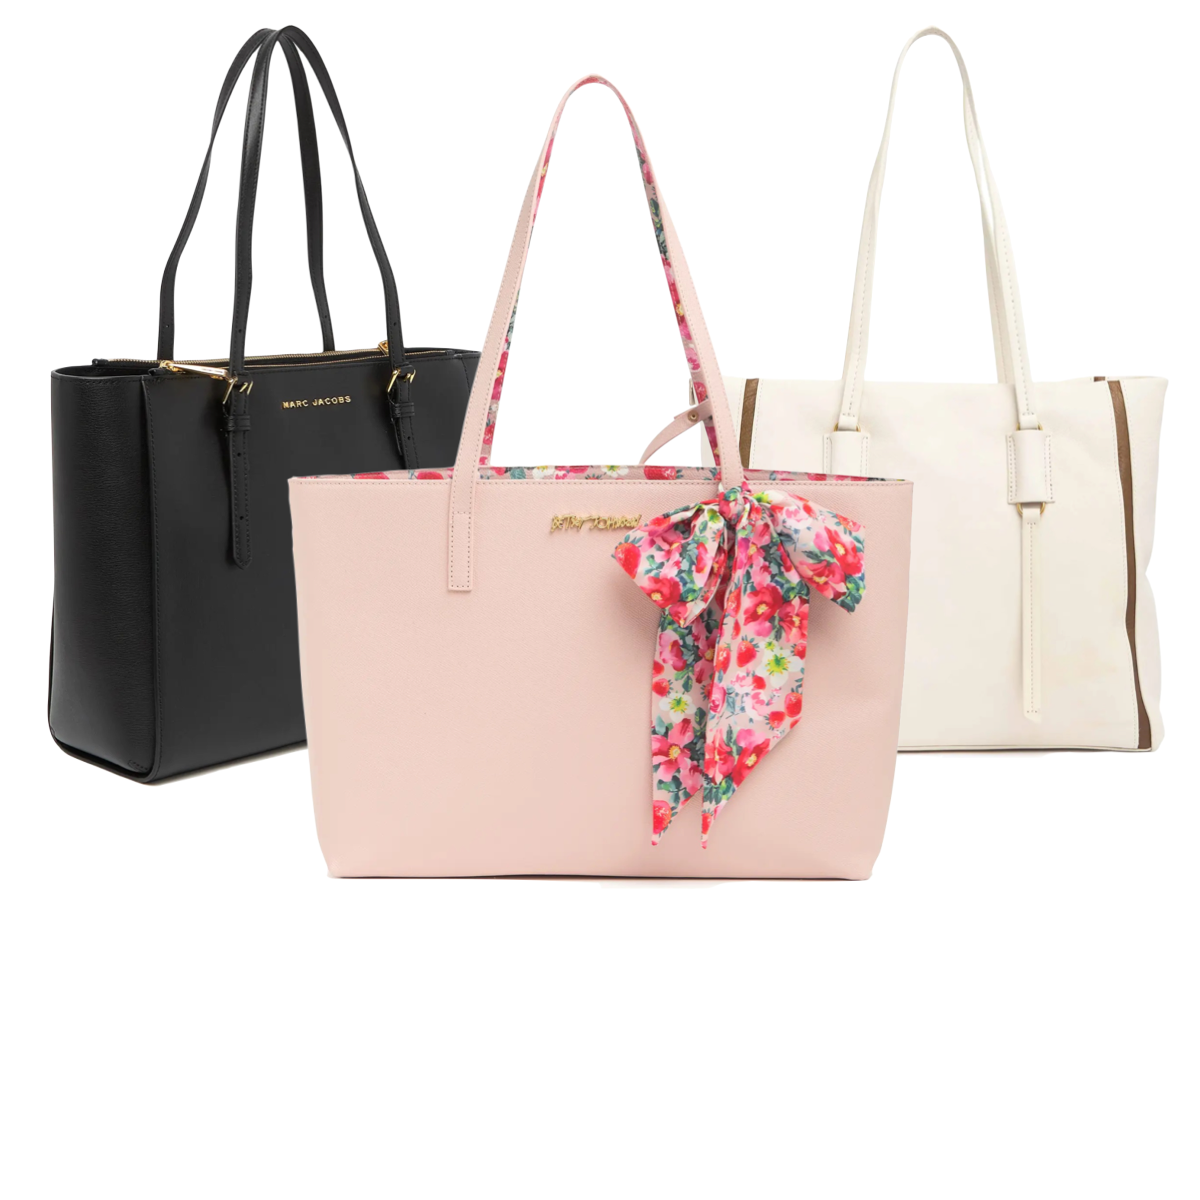 Nordstrom Rack: Get incredible low prices on top-rated purses